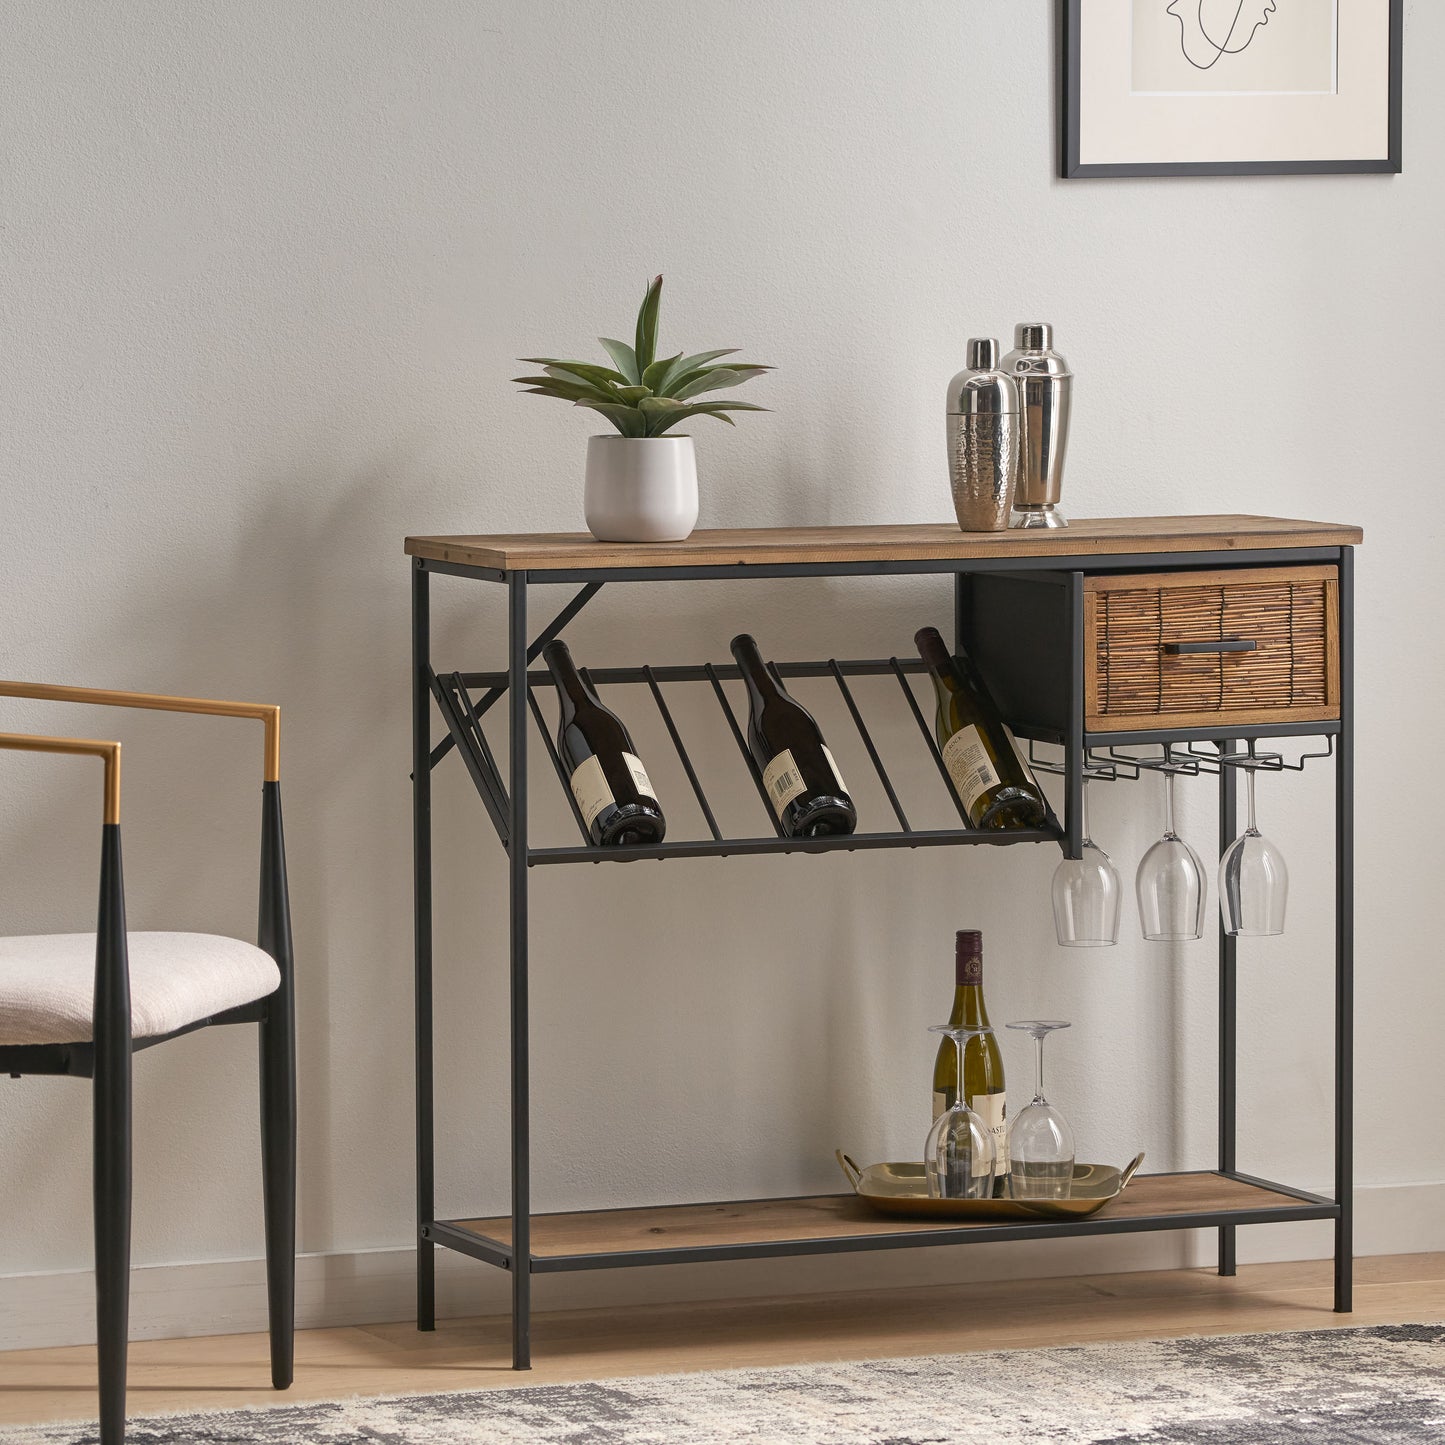 Broadwater Boho Industrial 8 Bottle Wine Rack Console Table with Storage, Natural and Black